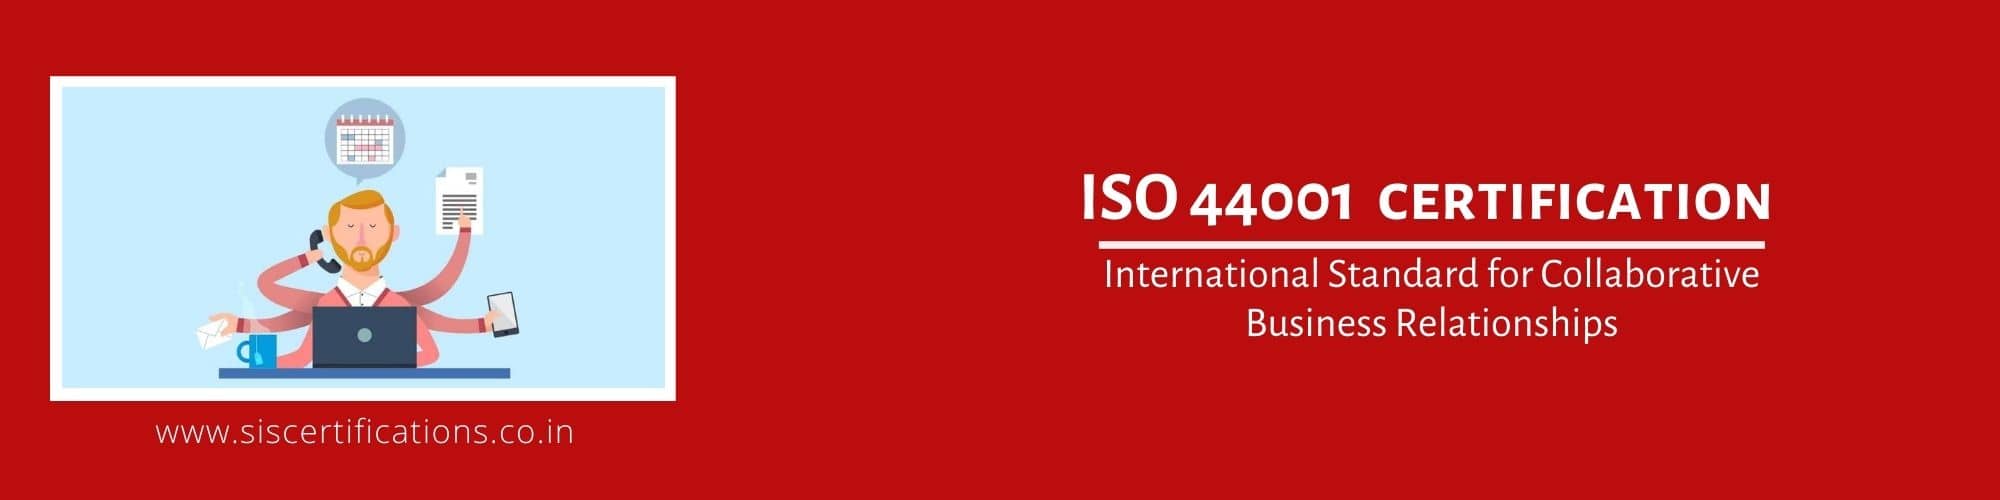 ISO 44001 Certification